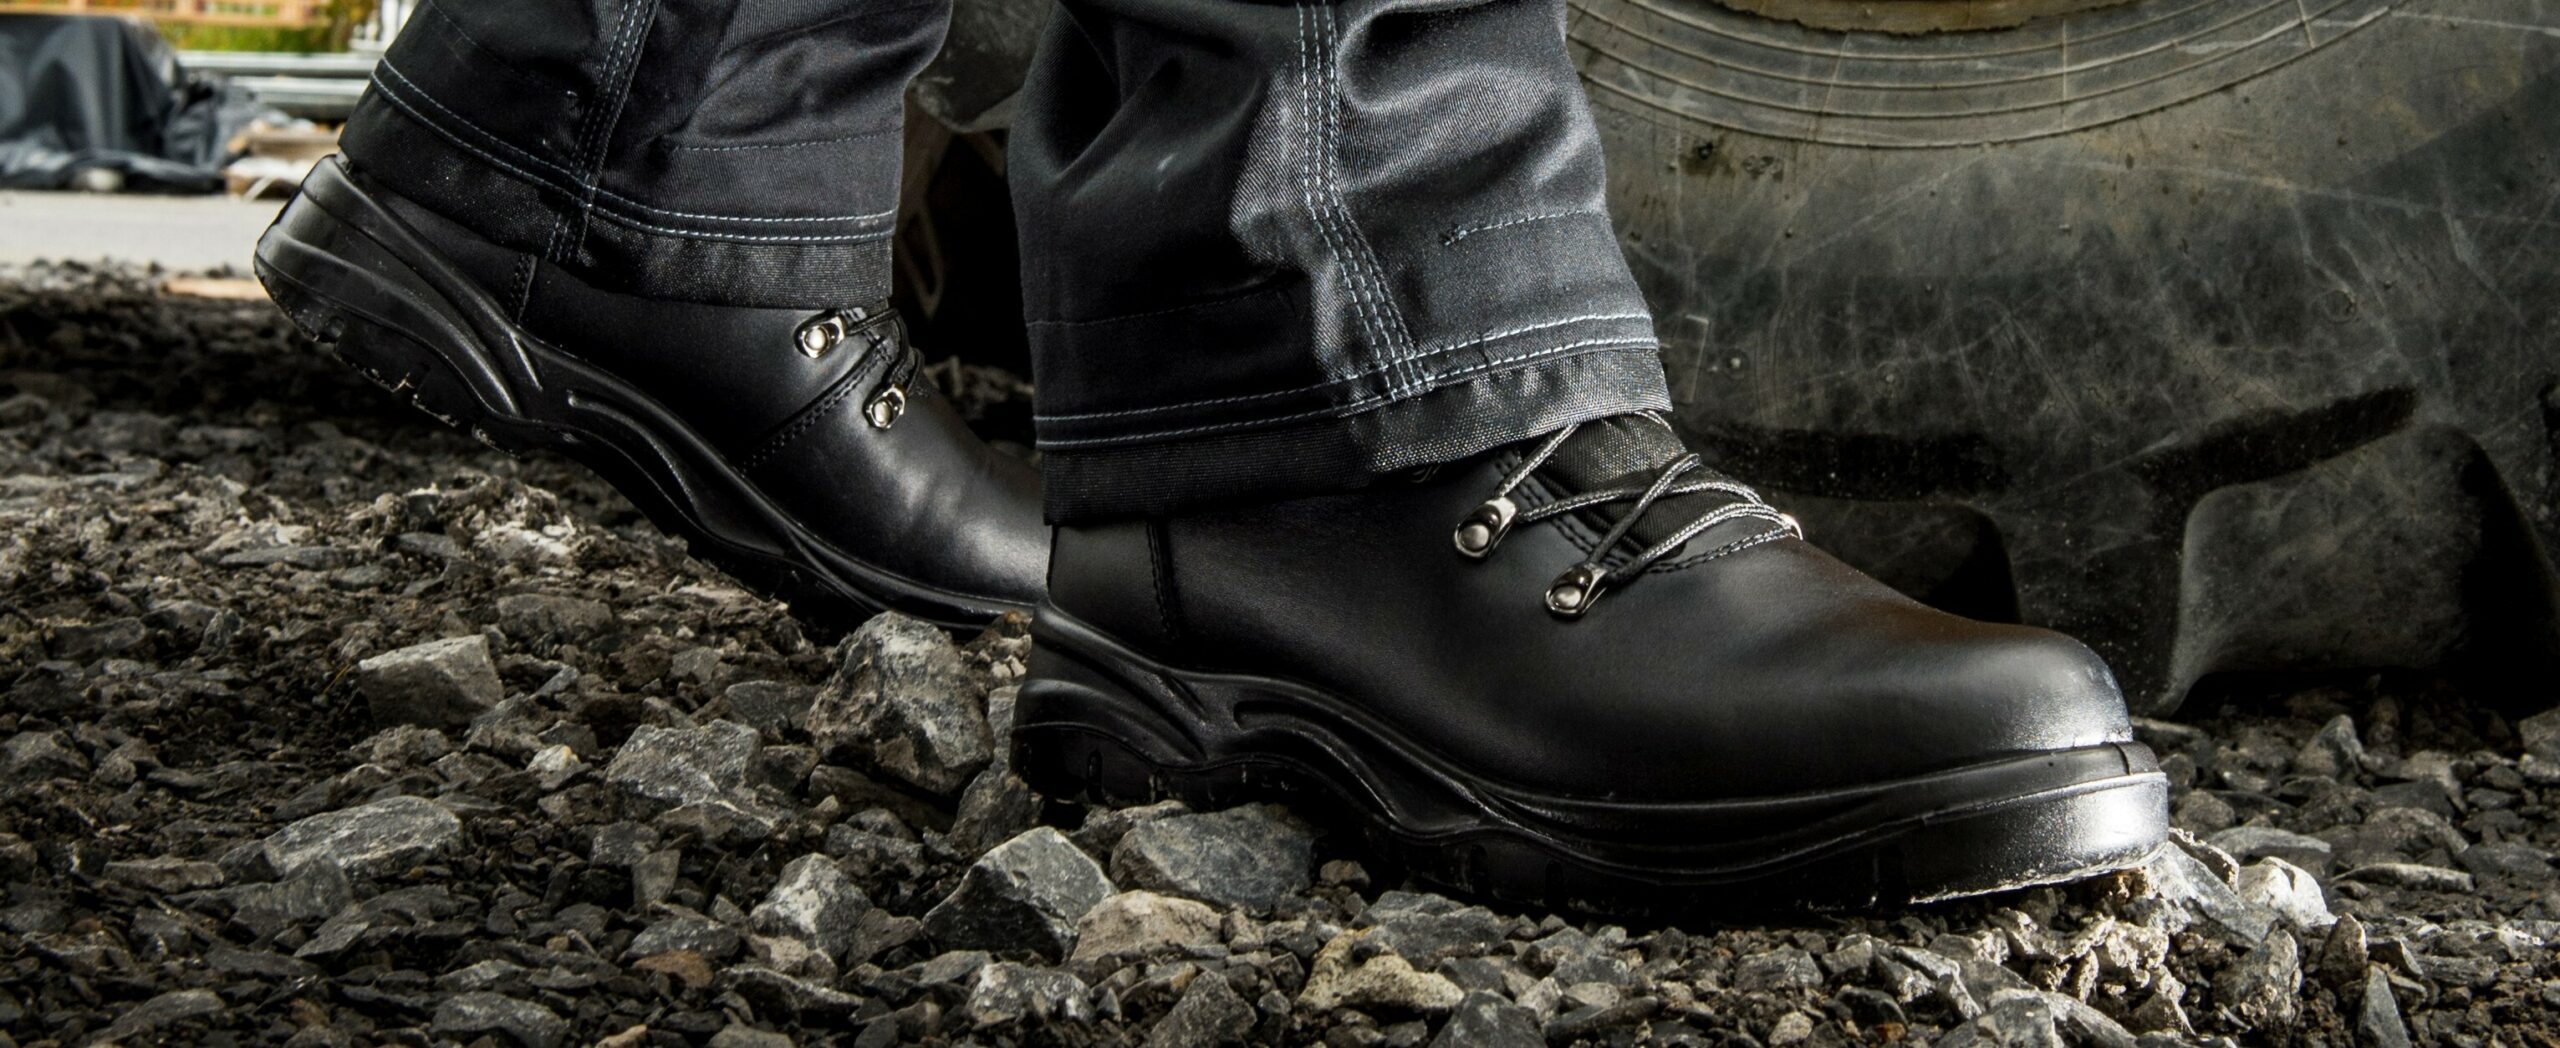 Advantages of Safety Footwear